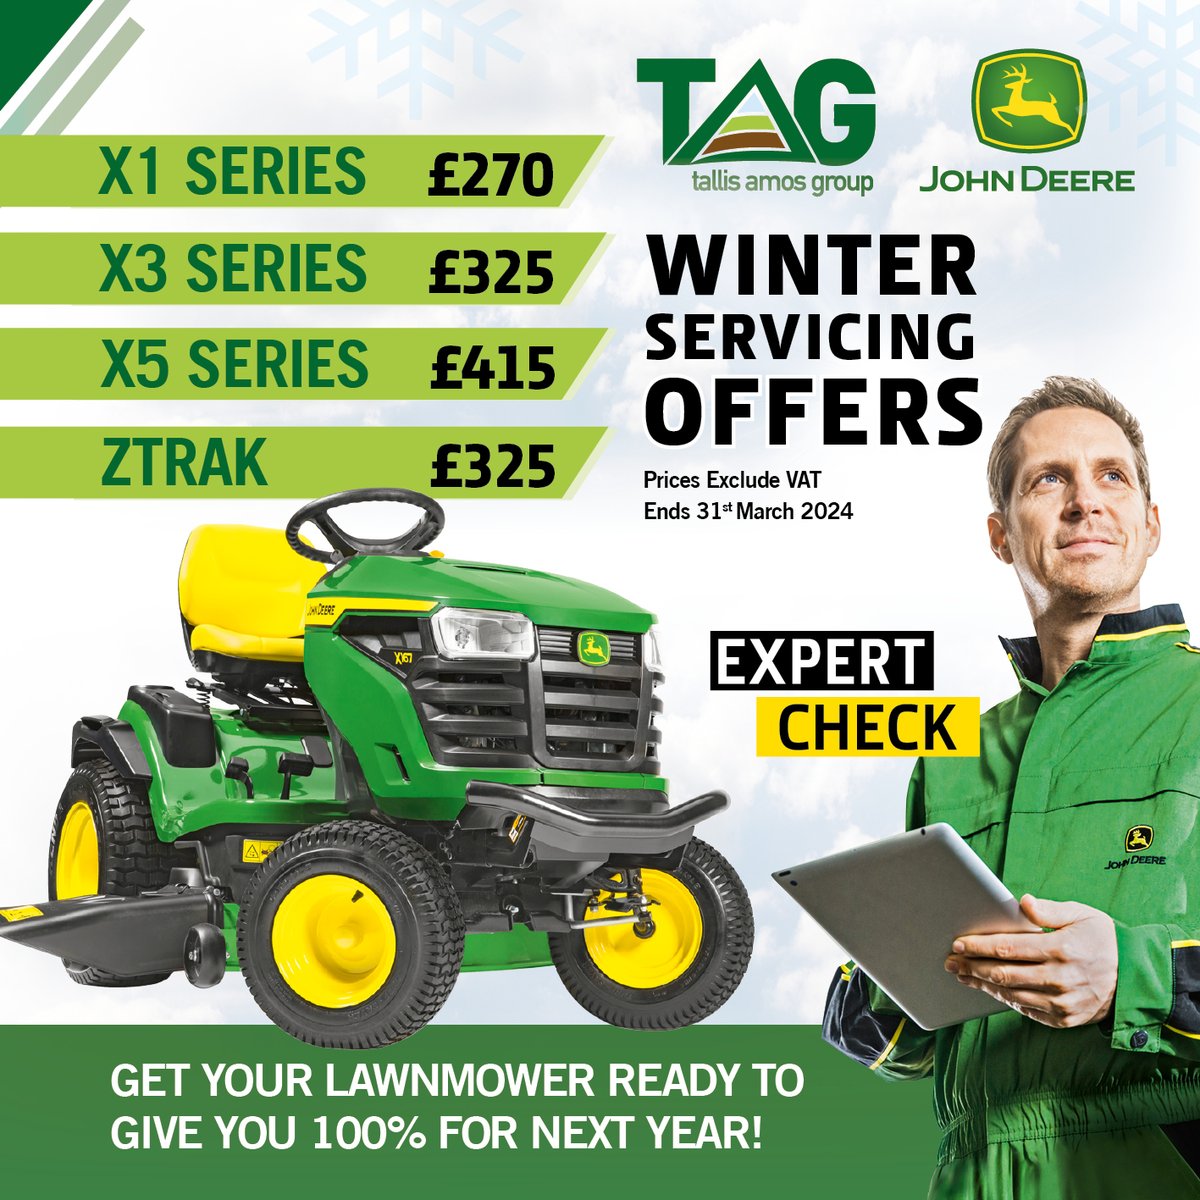 🔩❄️#WINTER SERVICING OFFERS❄️🔩
Ensure your #Lawnmower is in the best working order ready for next season!

BOOK IN TODAY! Call 📲0345 222 0456

🚛 COLLECTION & DELIVERY SERVICE AVAILABLE
❄️We service other models, enquire for a quote

@johndeere #repairs #parts #expertcheck